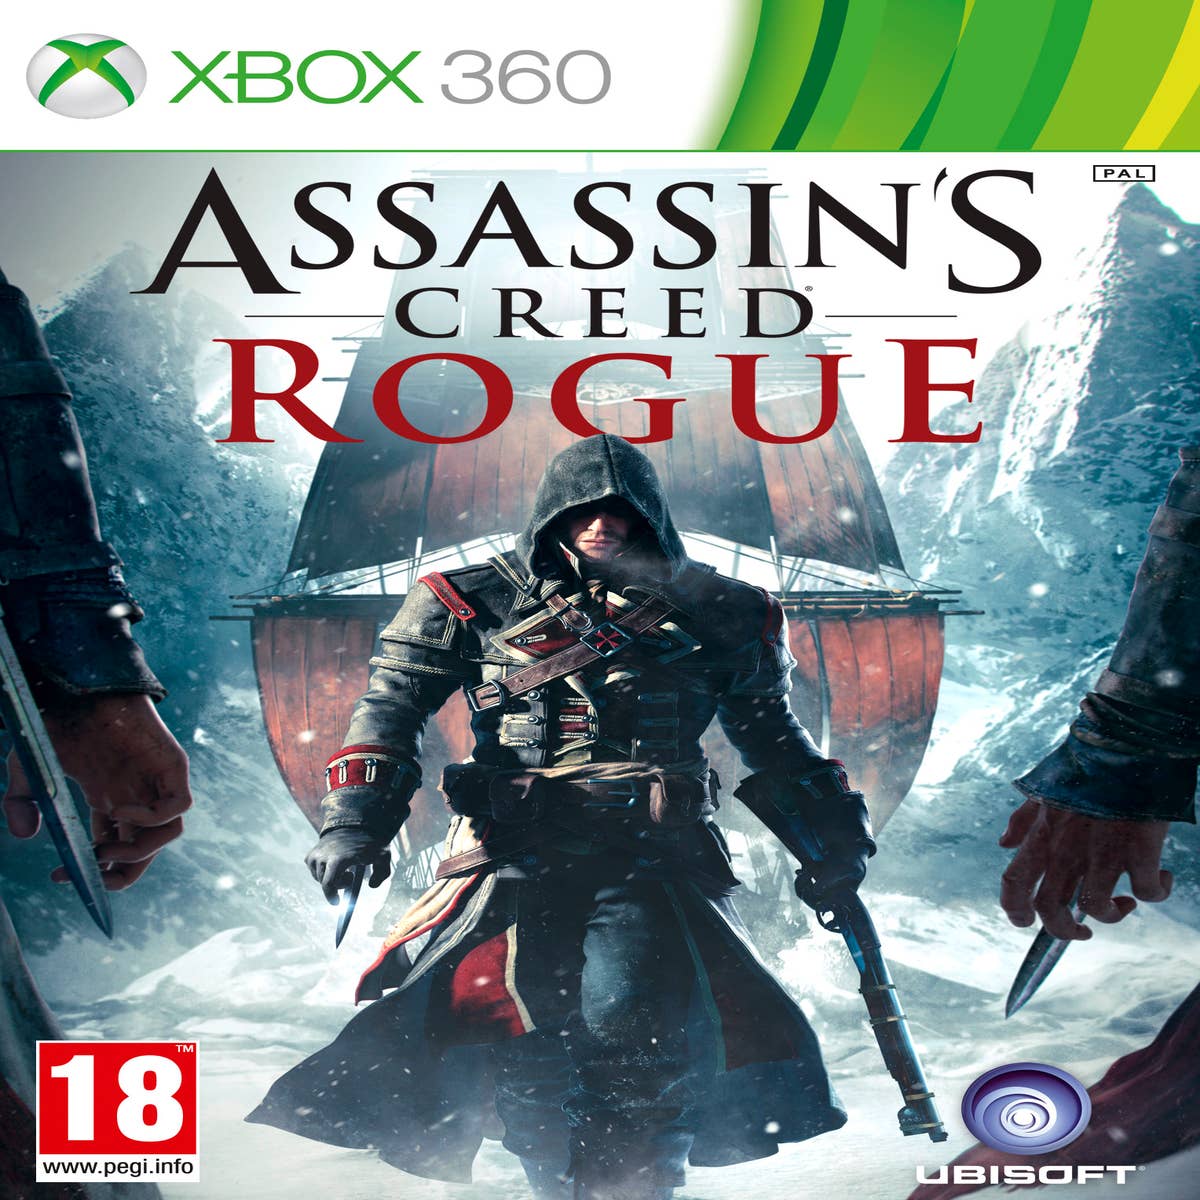 Assassin's Creed Rogue puts you behind the ship's wheel again this fall